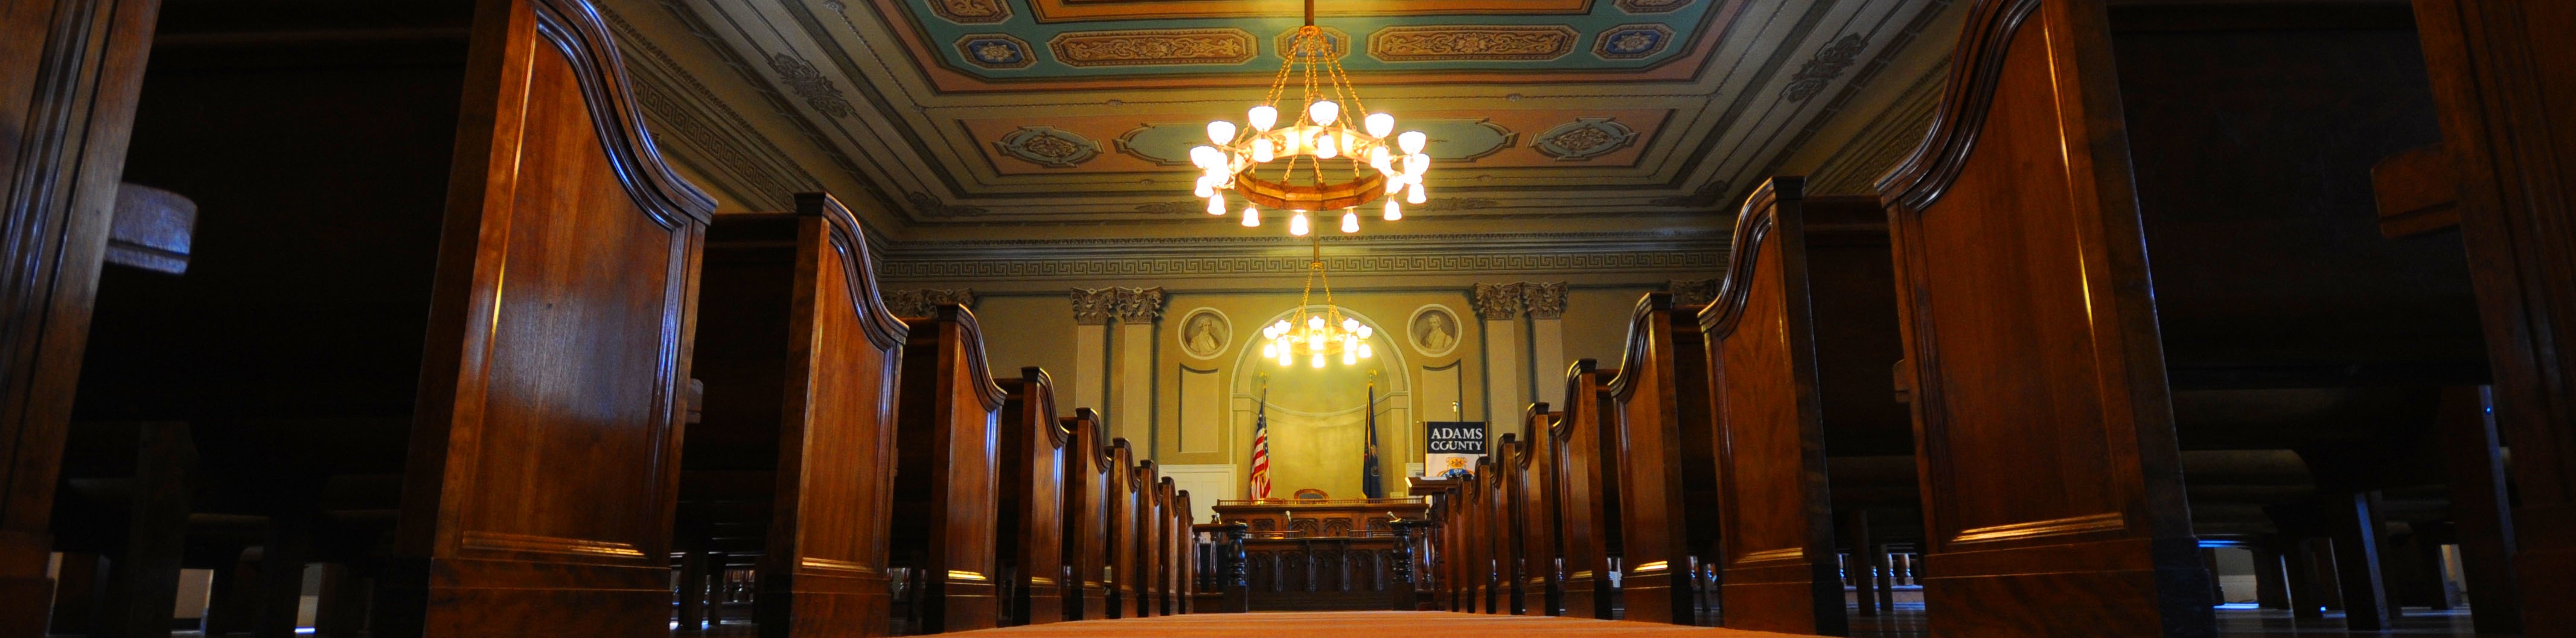 Image of Adams County Historical Courtroom